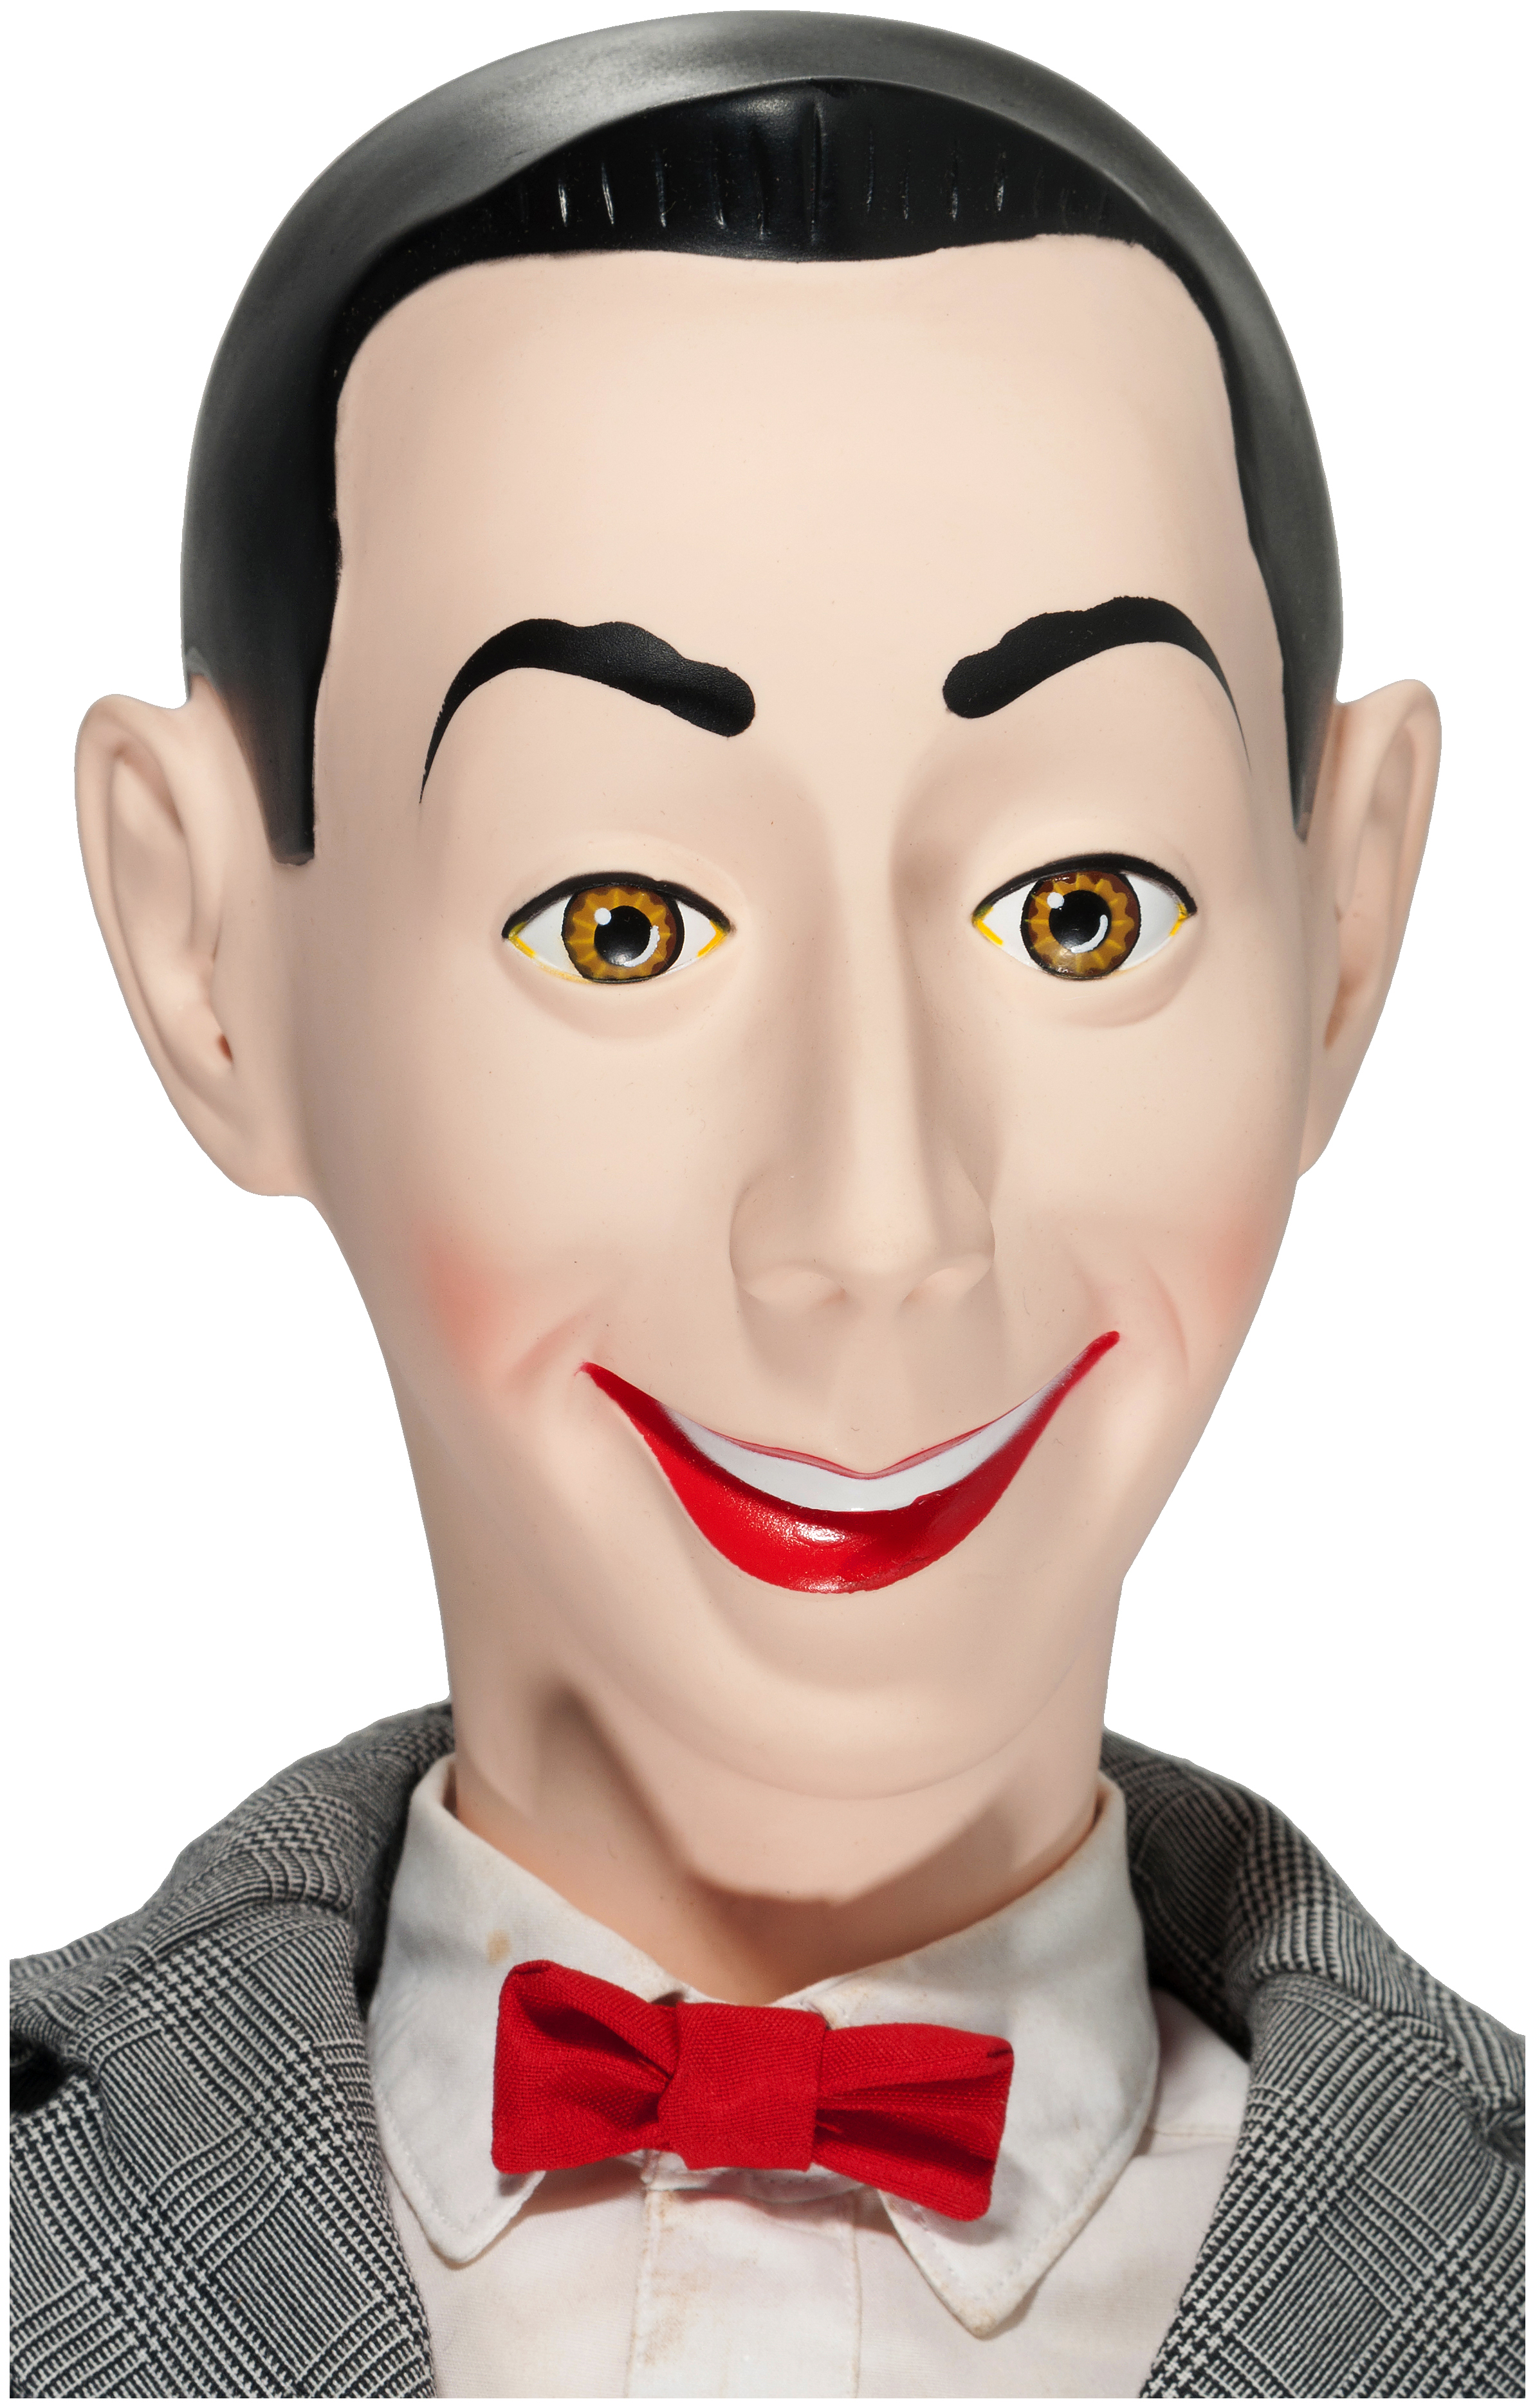 PEE-WEE-HERMAN-BOXED-LIMITED-EDITION-LARGE-DOLL : Image 1 of 5.